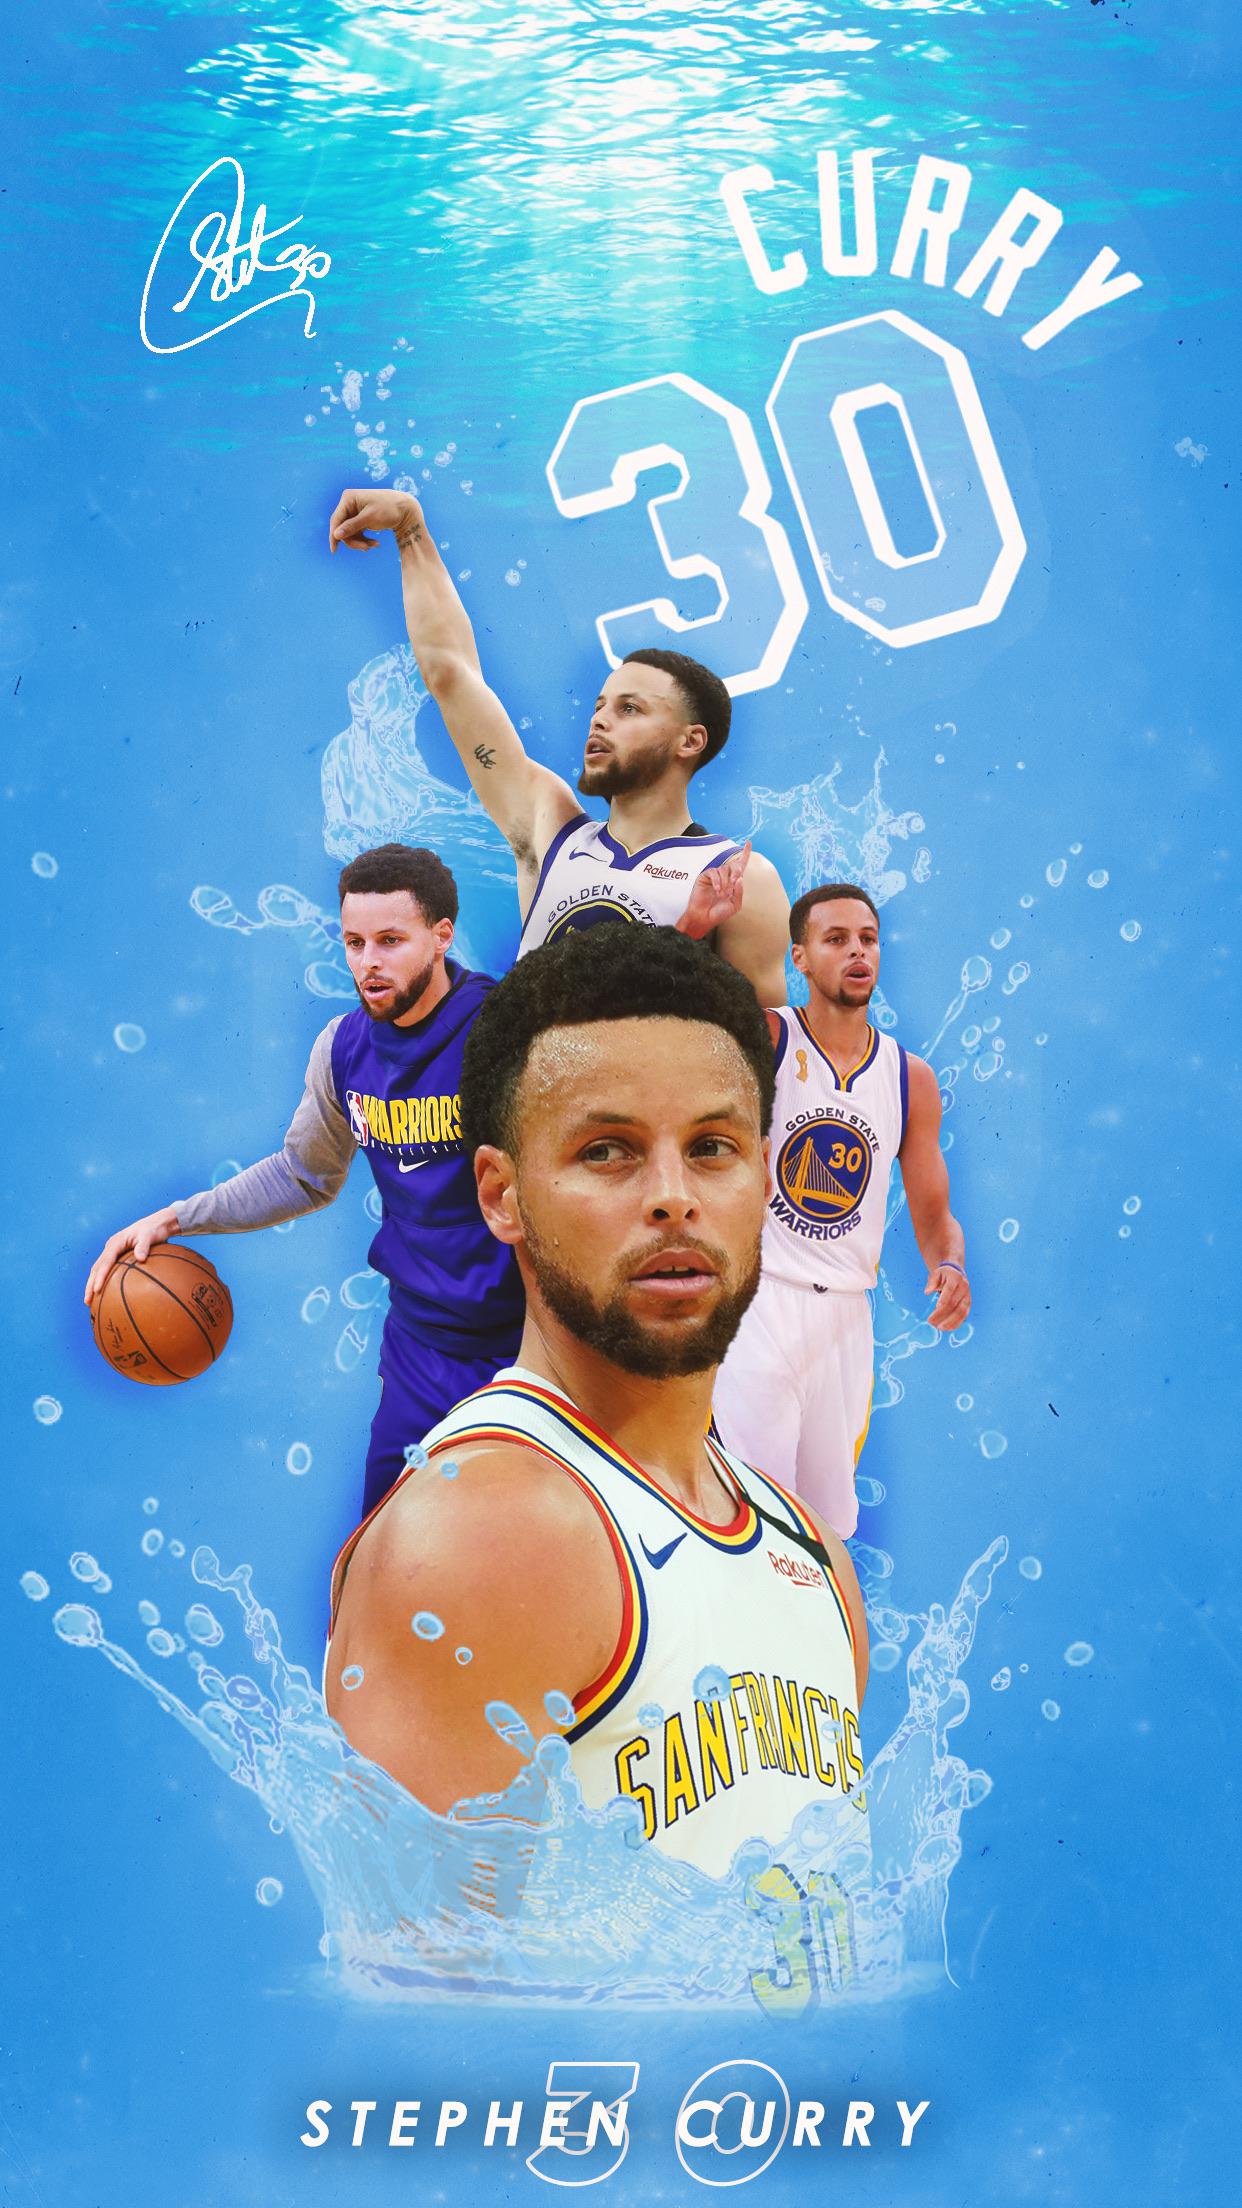 look at this curry wallpaper man, so inspirational